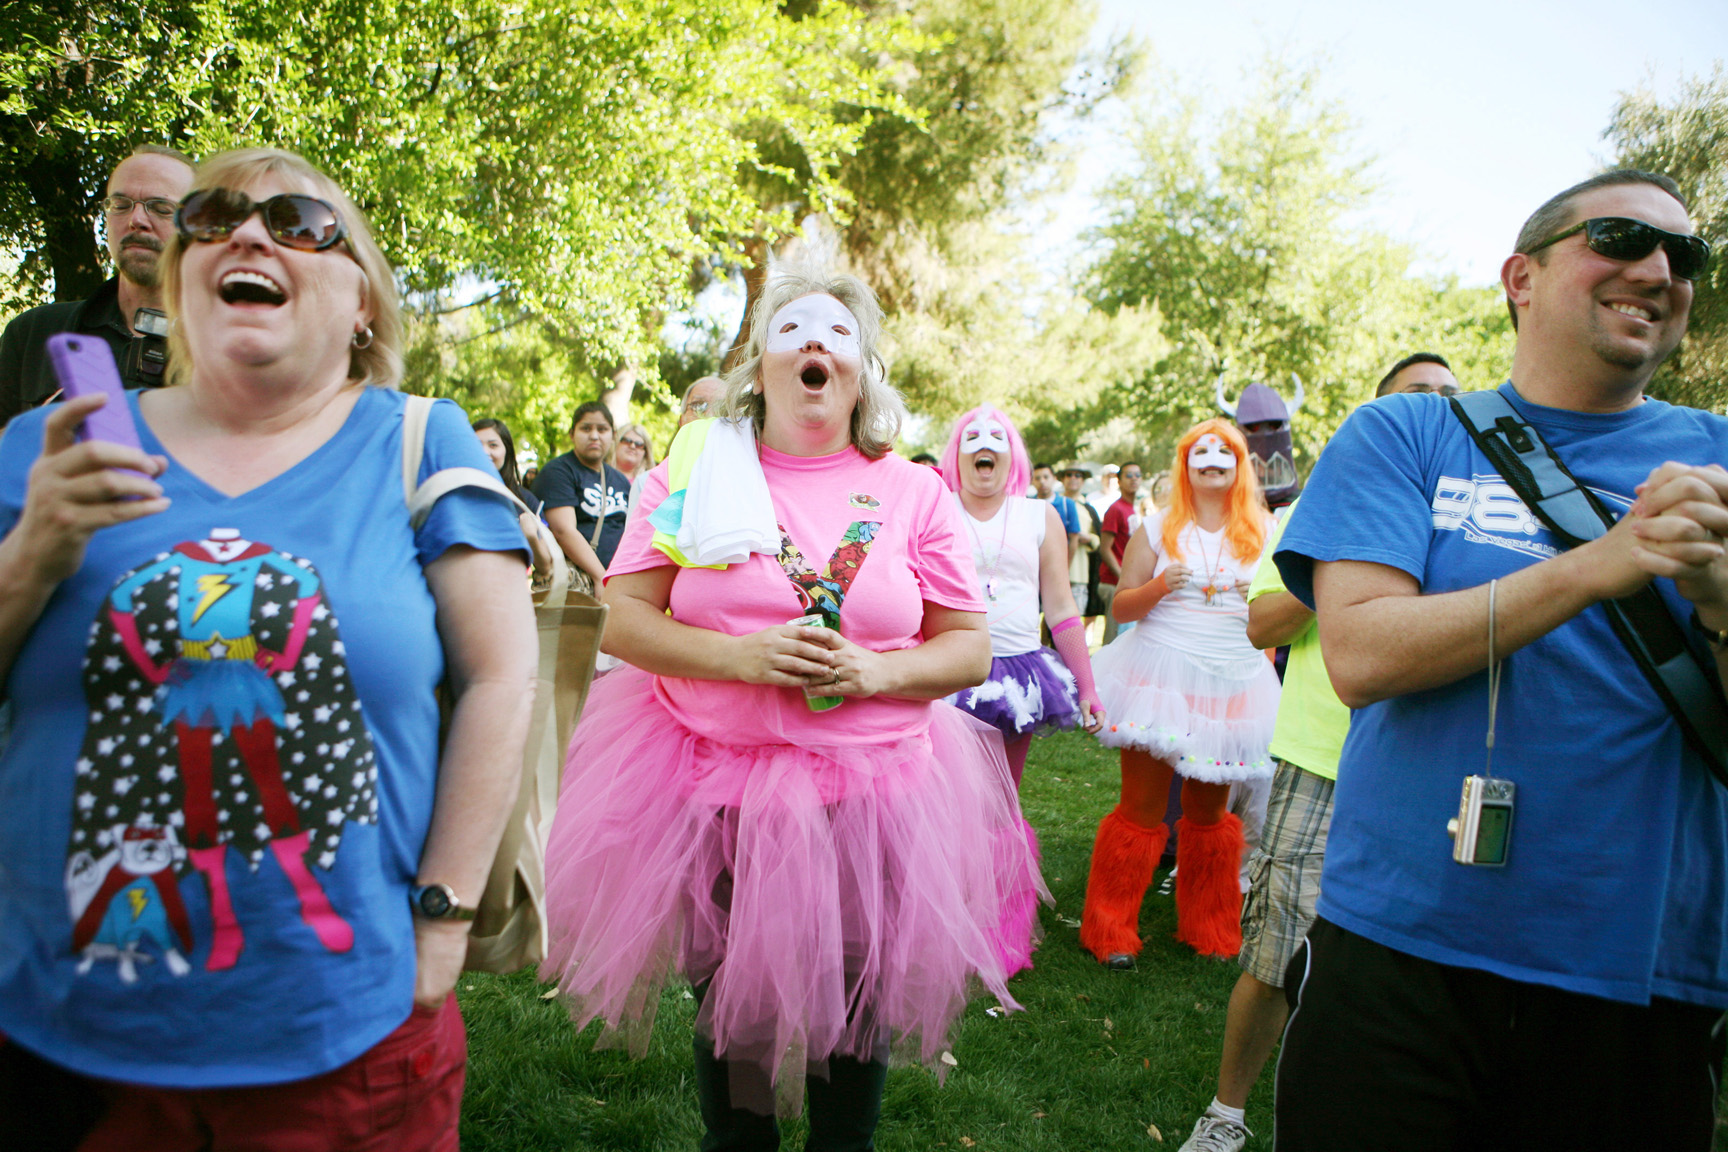 Mary Beth Zahedi, center, reacts as her fundraising Team Winos are announced winners during a rally prior to the start of the Aid for AIDS of Nevada (AFAN) 23rd Annual AIDS Walk at UNLV Saturday, April 14, 2013, in Las Vegas. Her teammates Mary Murphy, far left, Alicia Farrow, right center, and Tanya Paynter, right, stand nearby. The Winos won awards for highest fundraising team and most creative team. The team dressed as superheroes for the walk